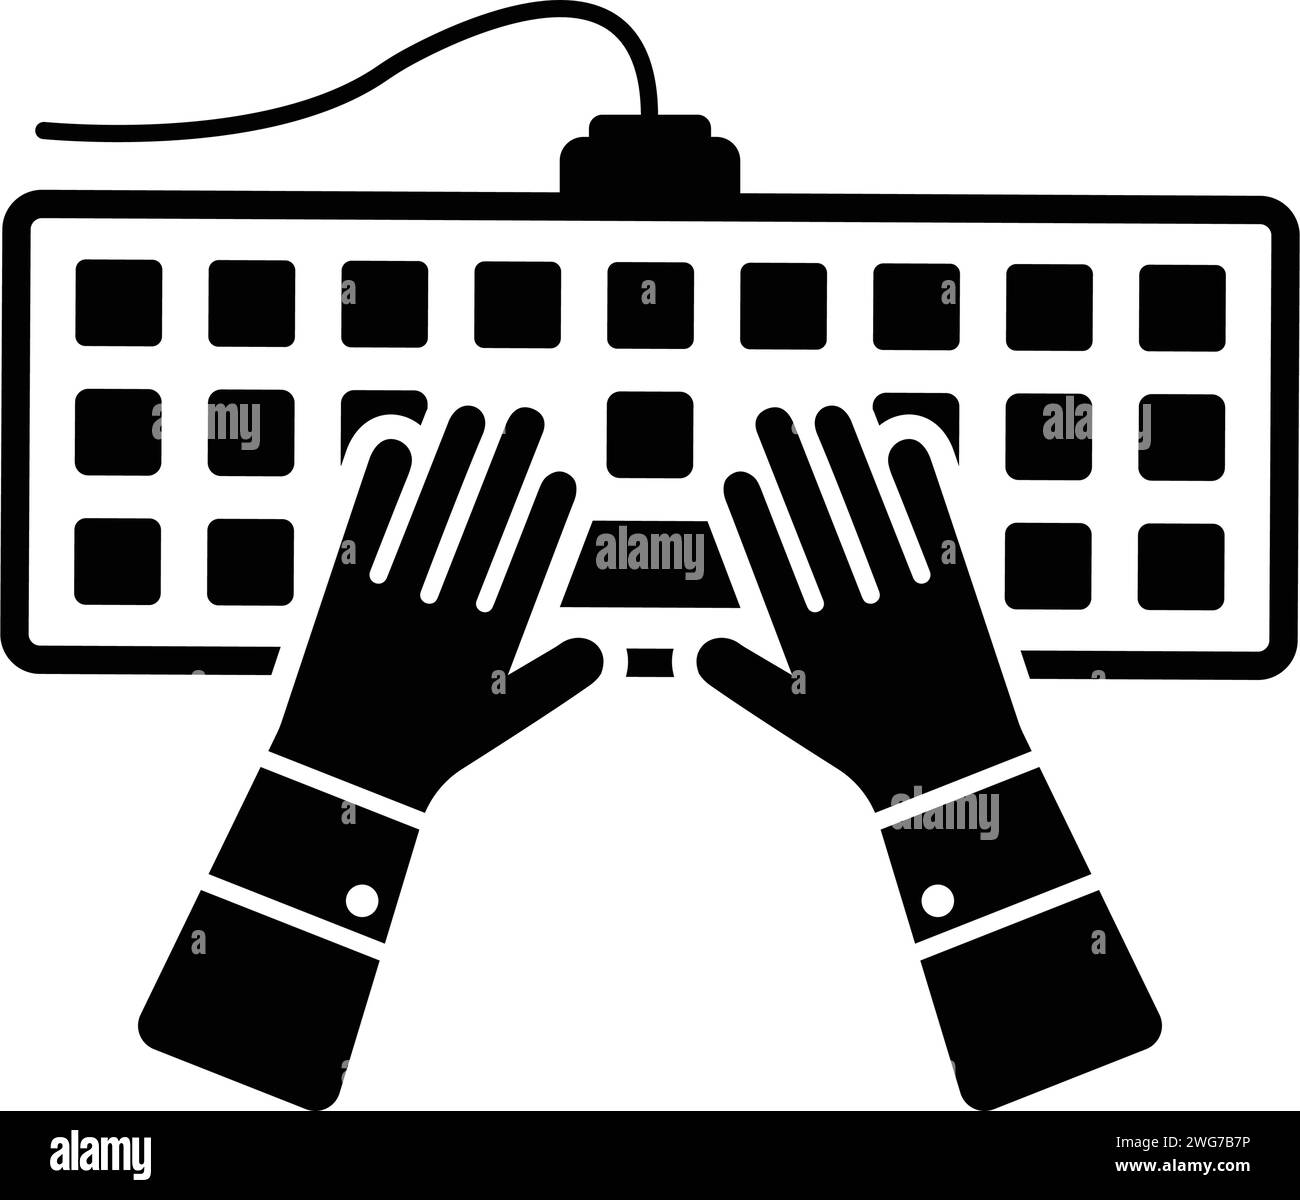 Hands typing, keyboard, notebook icon. is isolated on white background. Simple vector illustration for graphic and web design or commercial purposes. Stock Vector